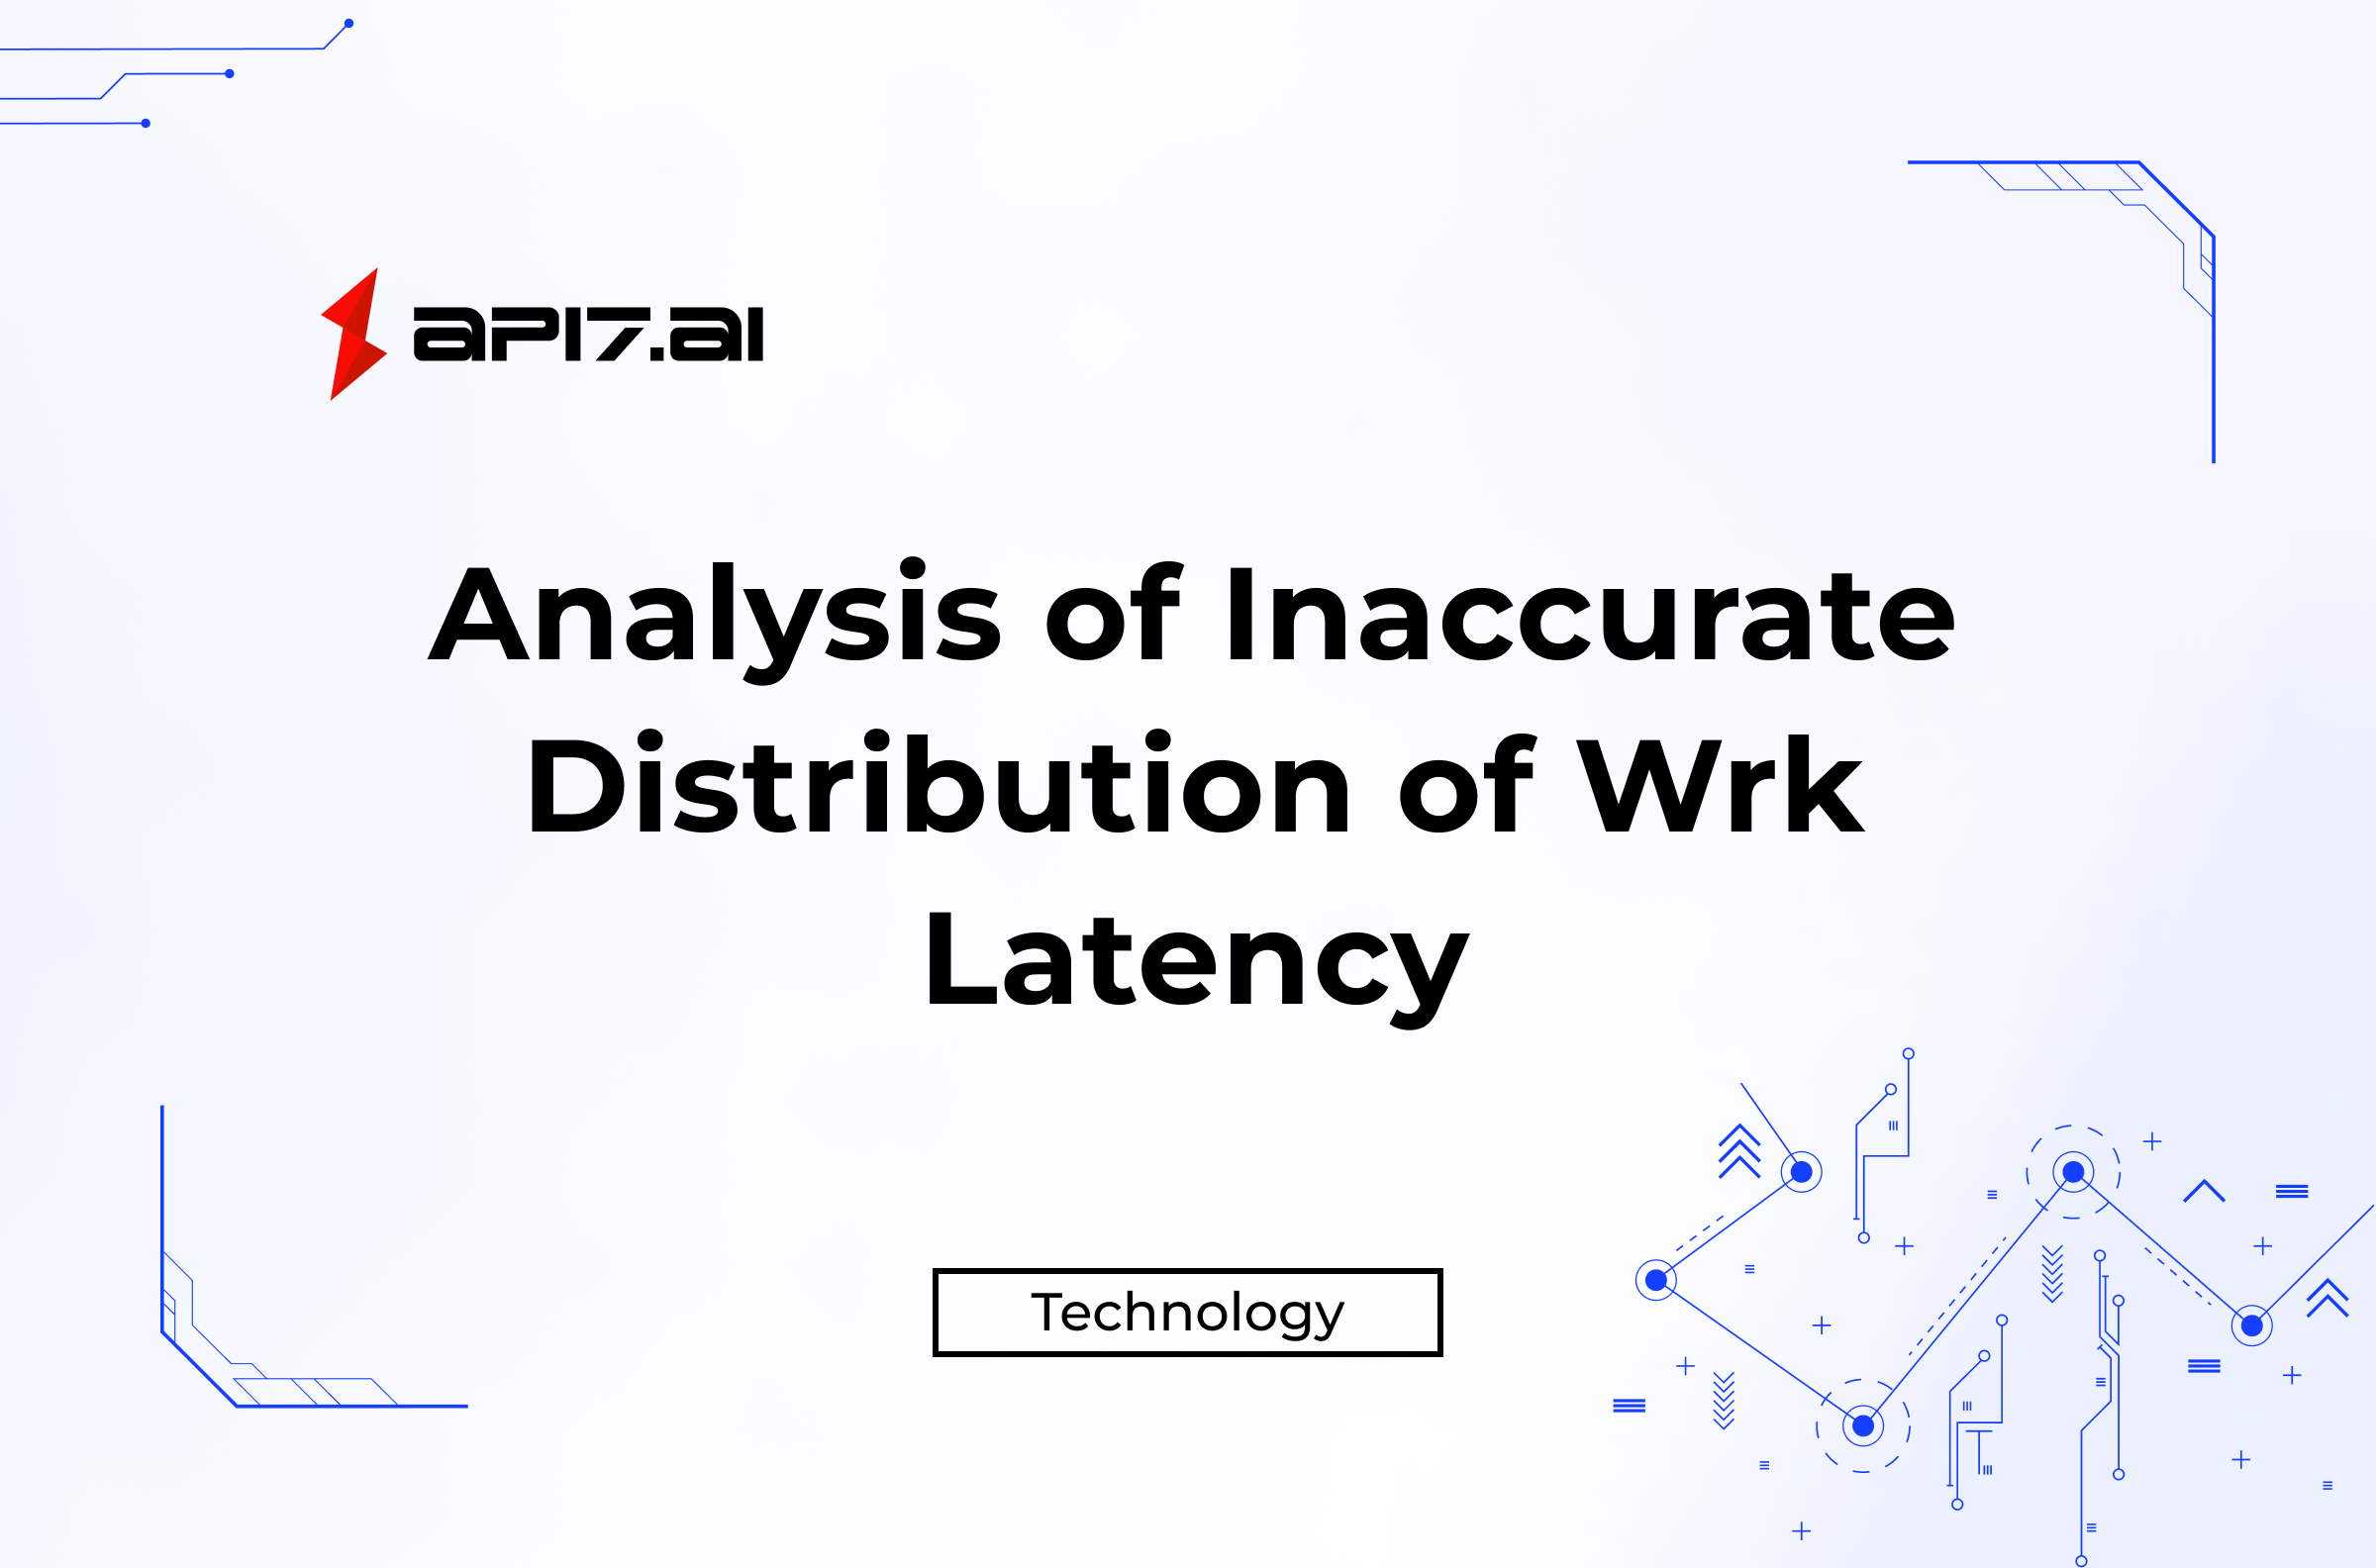 Analysis of Inaccurate Distribution of Wrk Latency